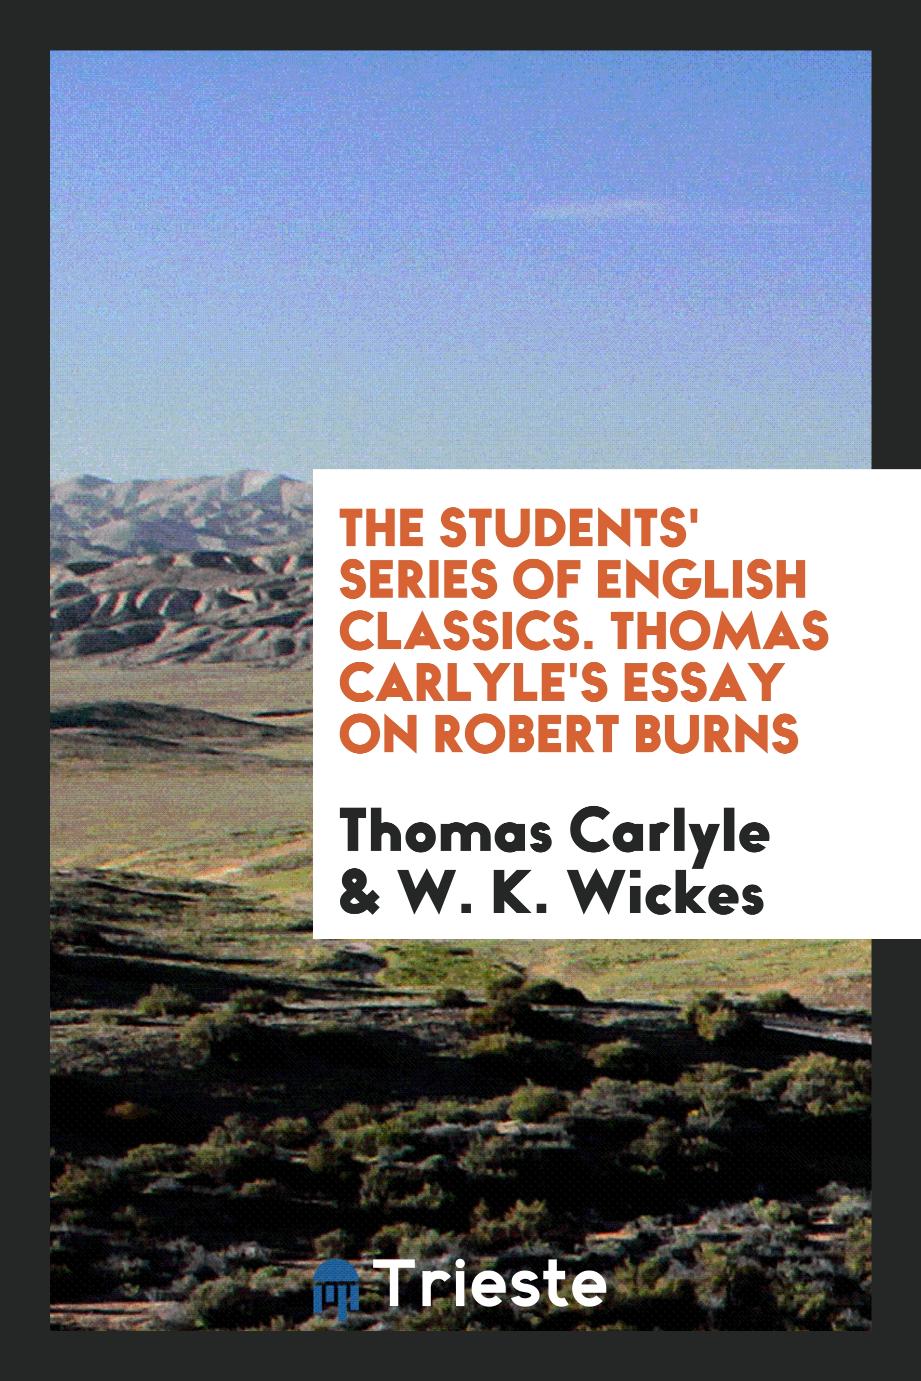 The Students' Series of English Classics. Thomas Carlyle's Essay on Robert Burns